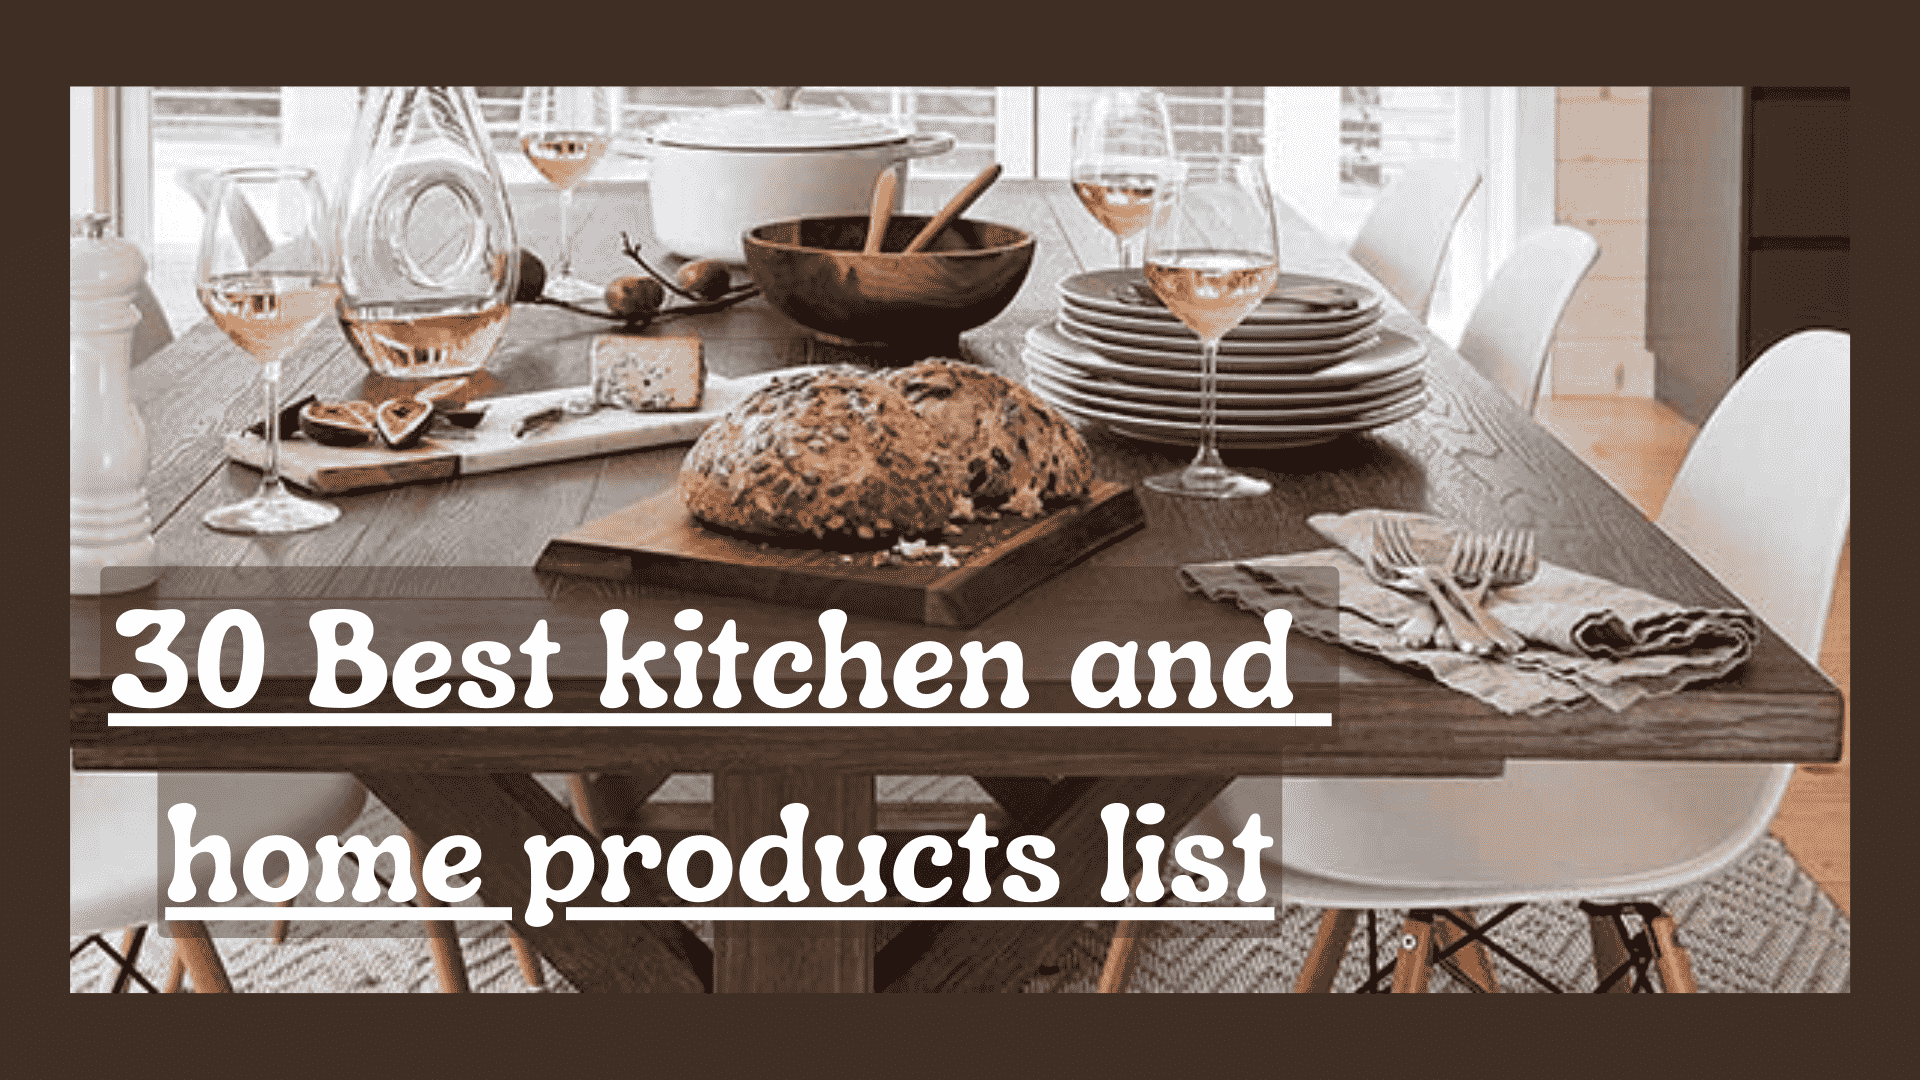 30 Best kitchen and home products list